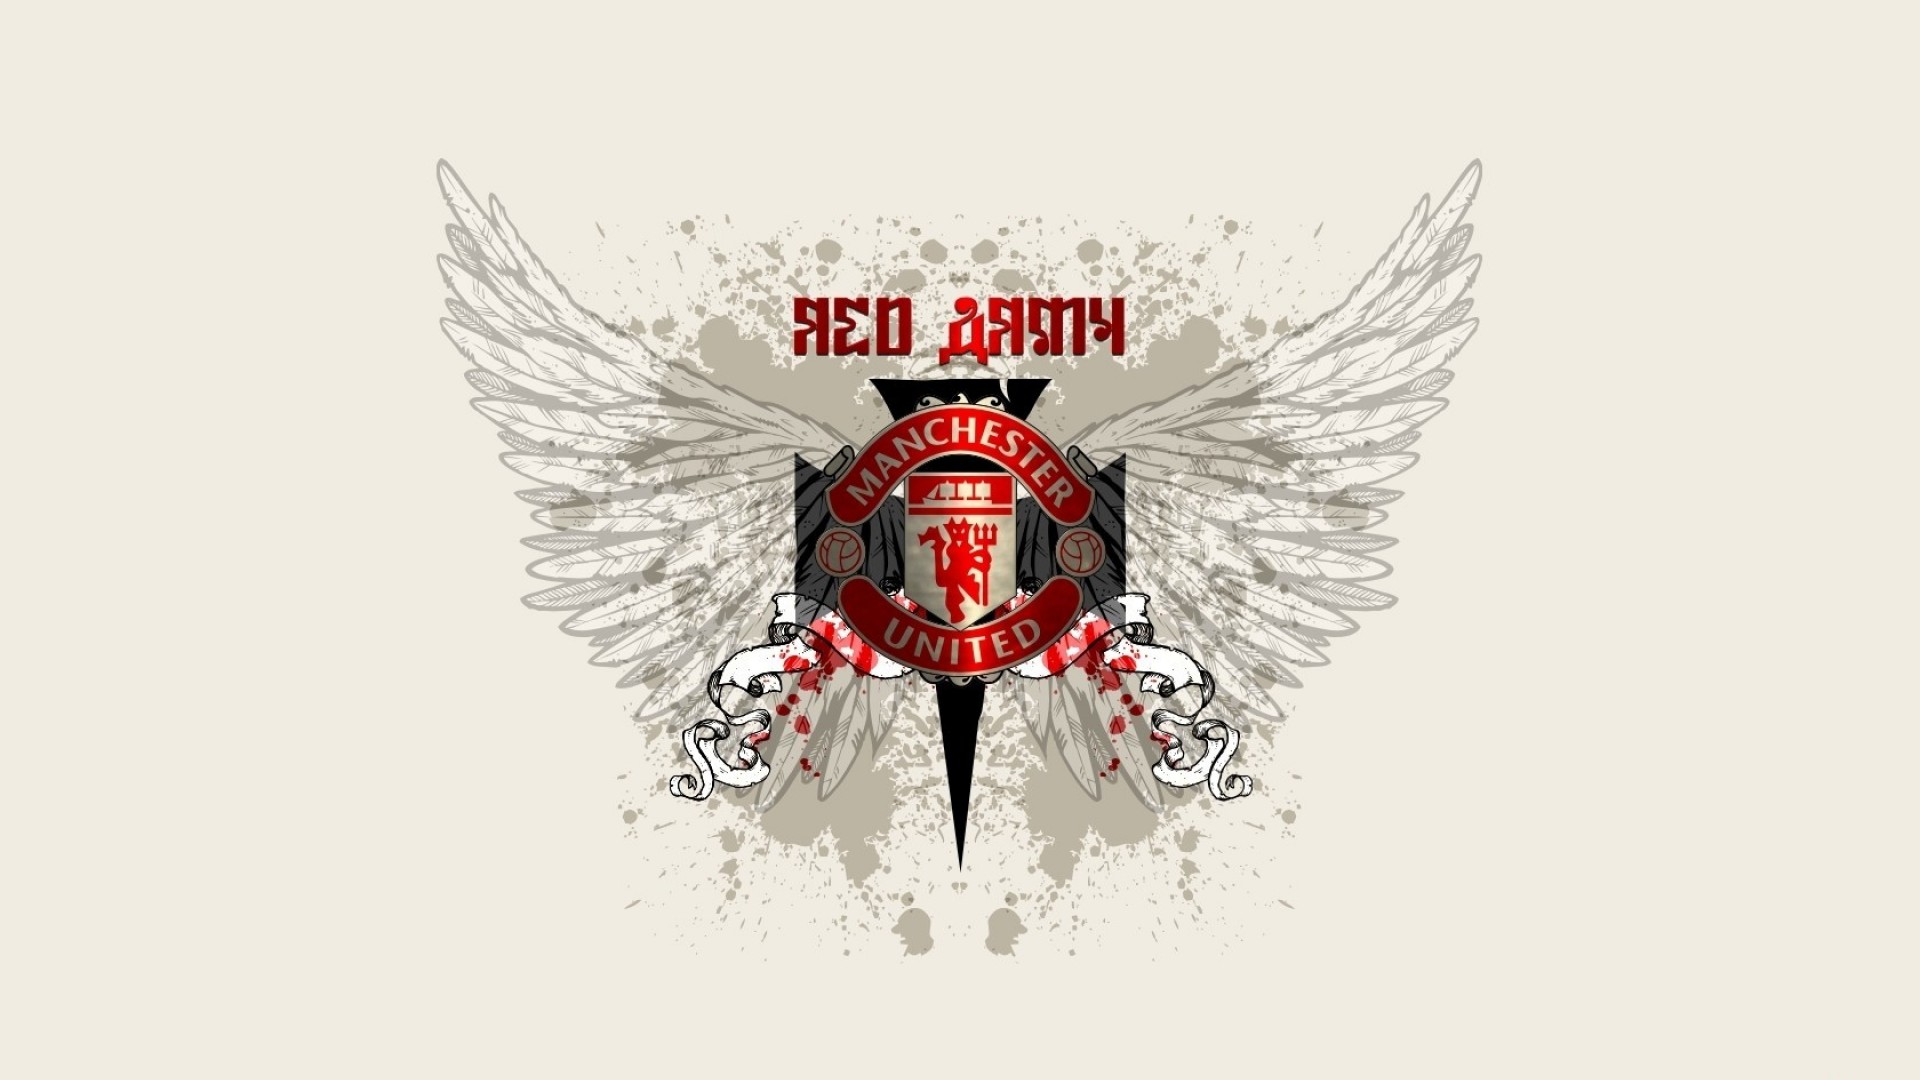 Red Army Manchester United Wallpaper Wallpaperlepi